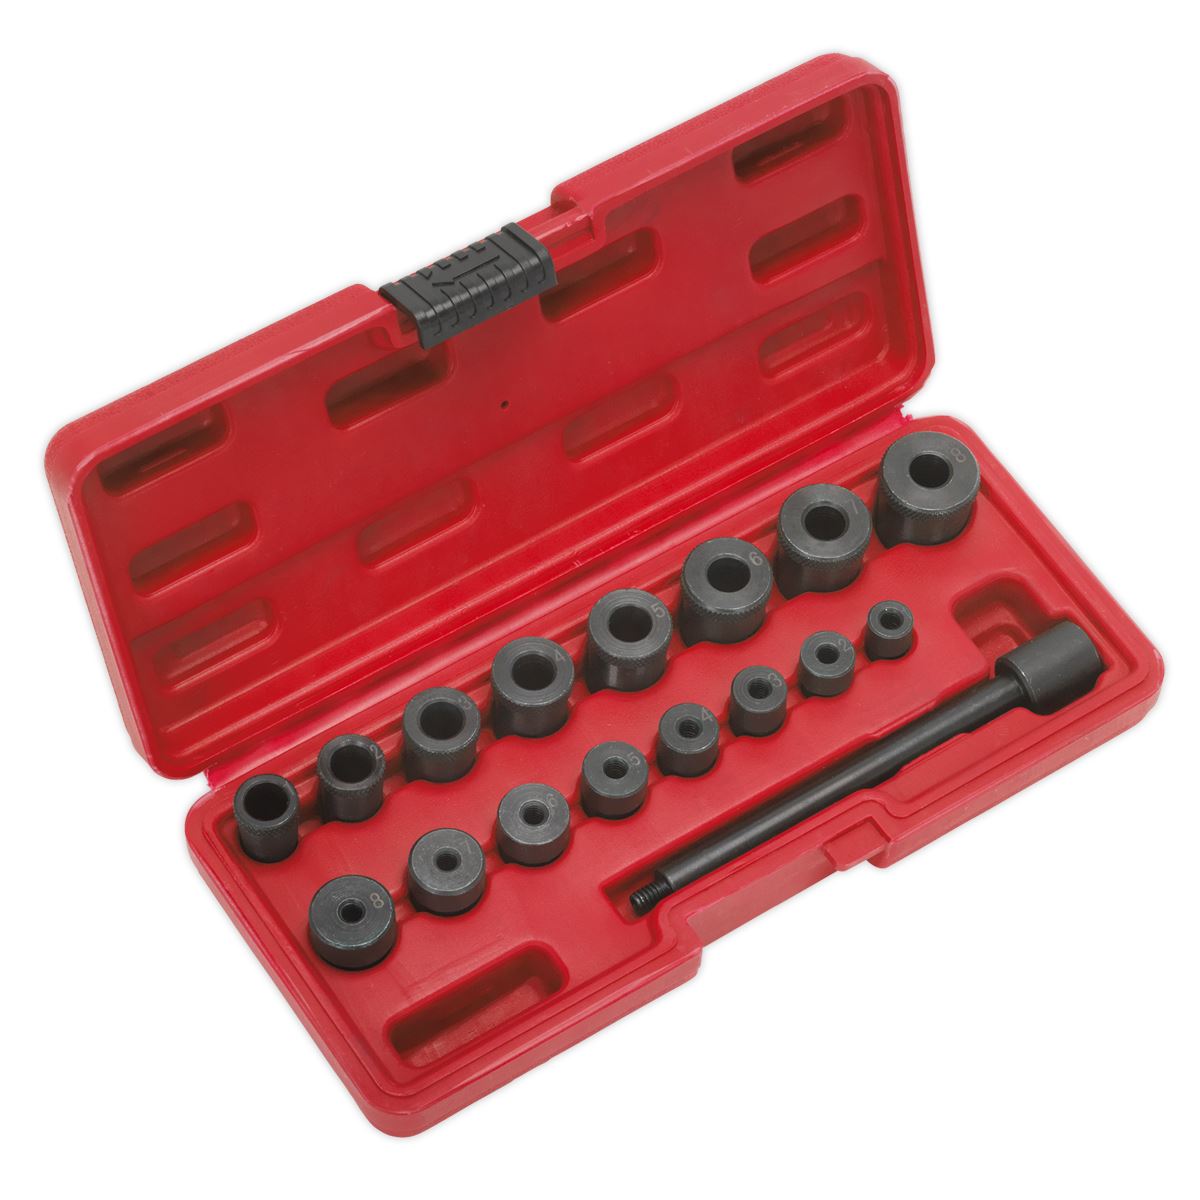 Sealey Universal Clutch Aligning Tool Set 17pc